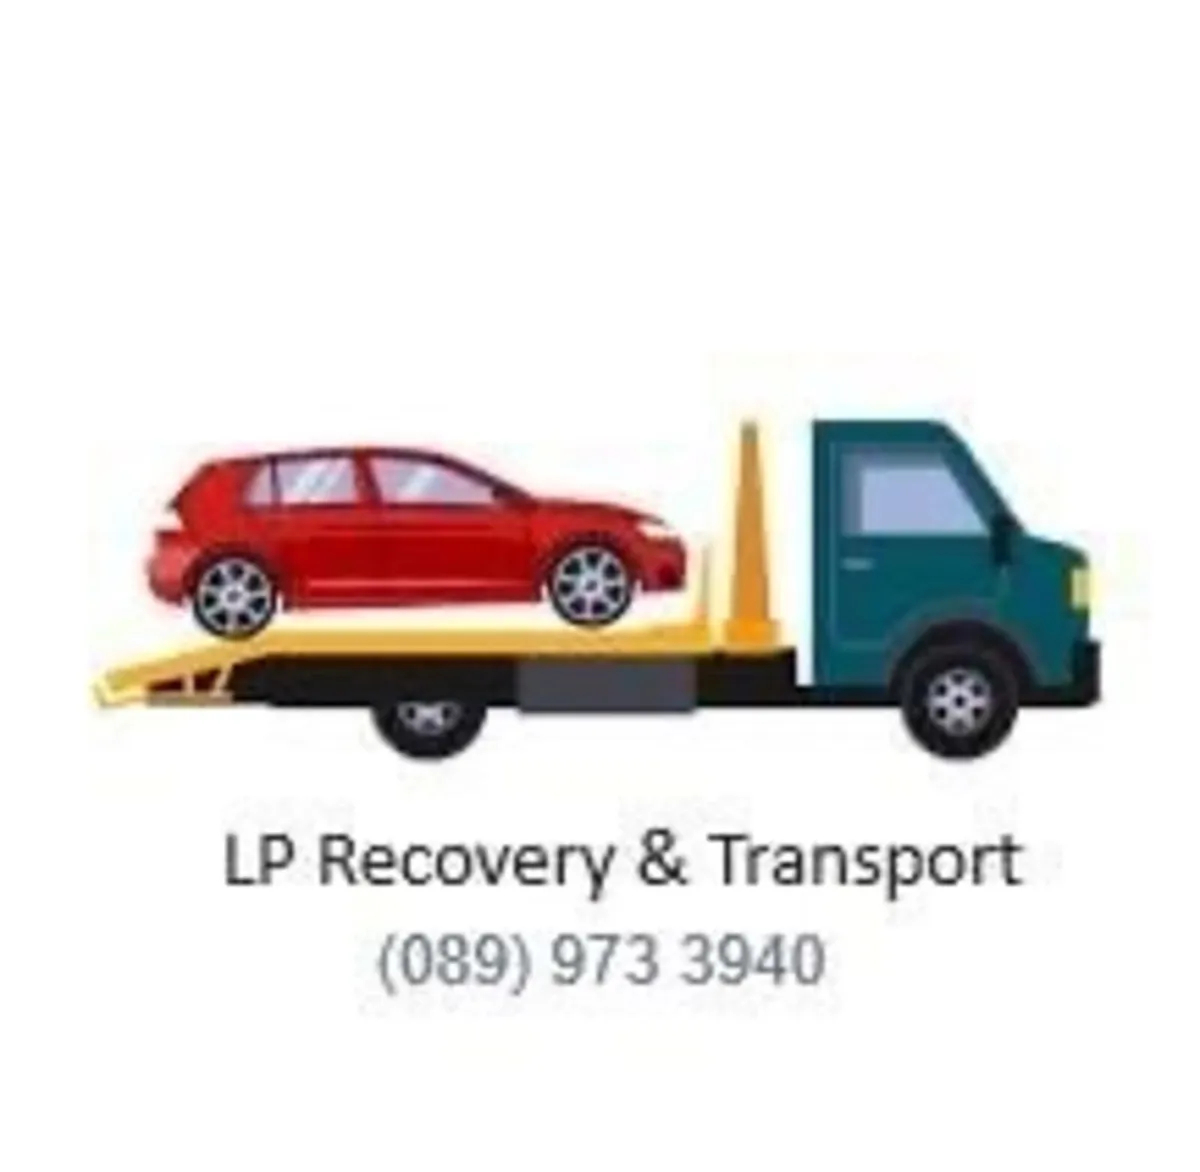 Recovery service & transport